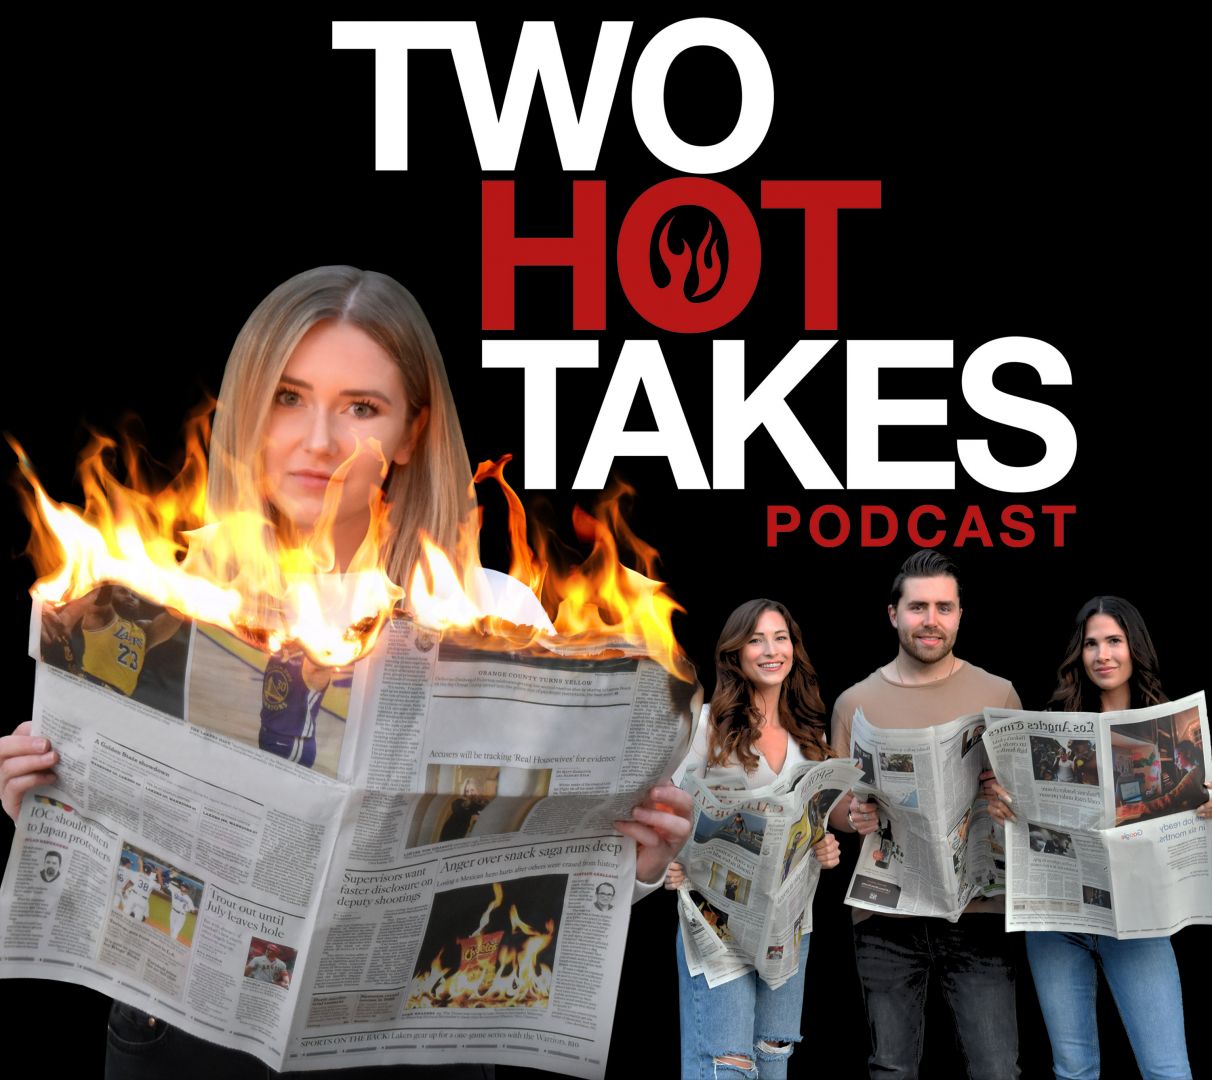 Advertise on “Two Hot Takes Podcast”